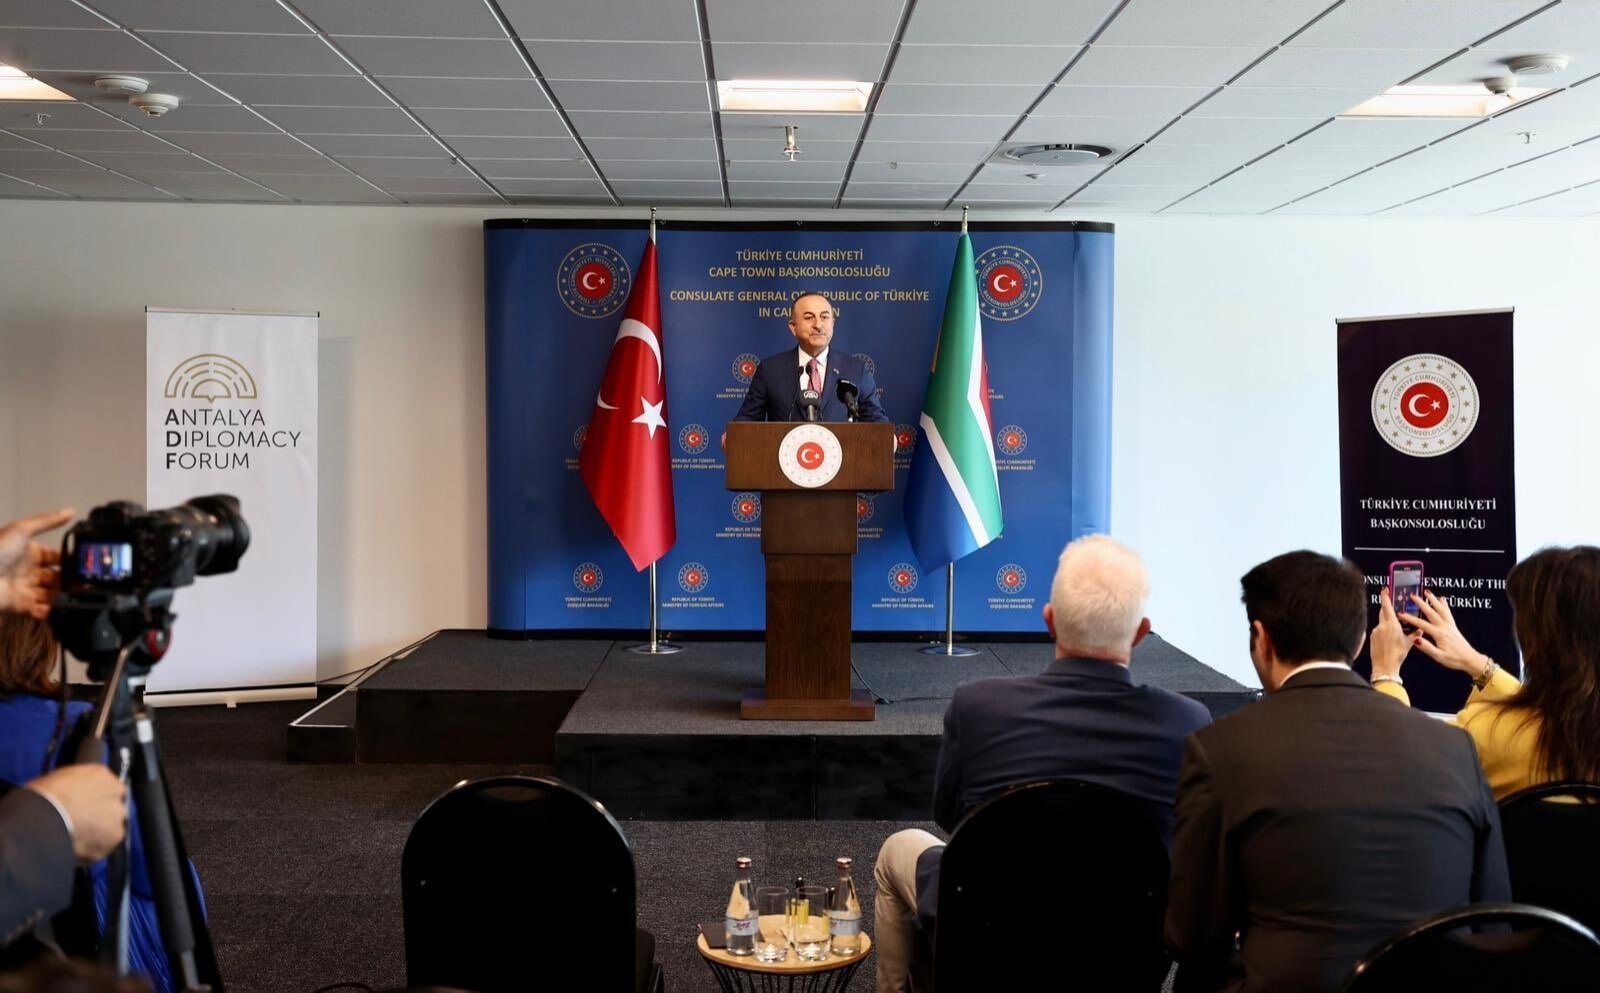 Foreign Minister Mevlüt Çavuşoğlu speaks at the opening ceremony, in Cape Town, South Africa, Jan. 9, 2023. (IHA Photo)